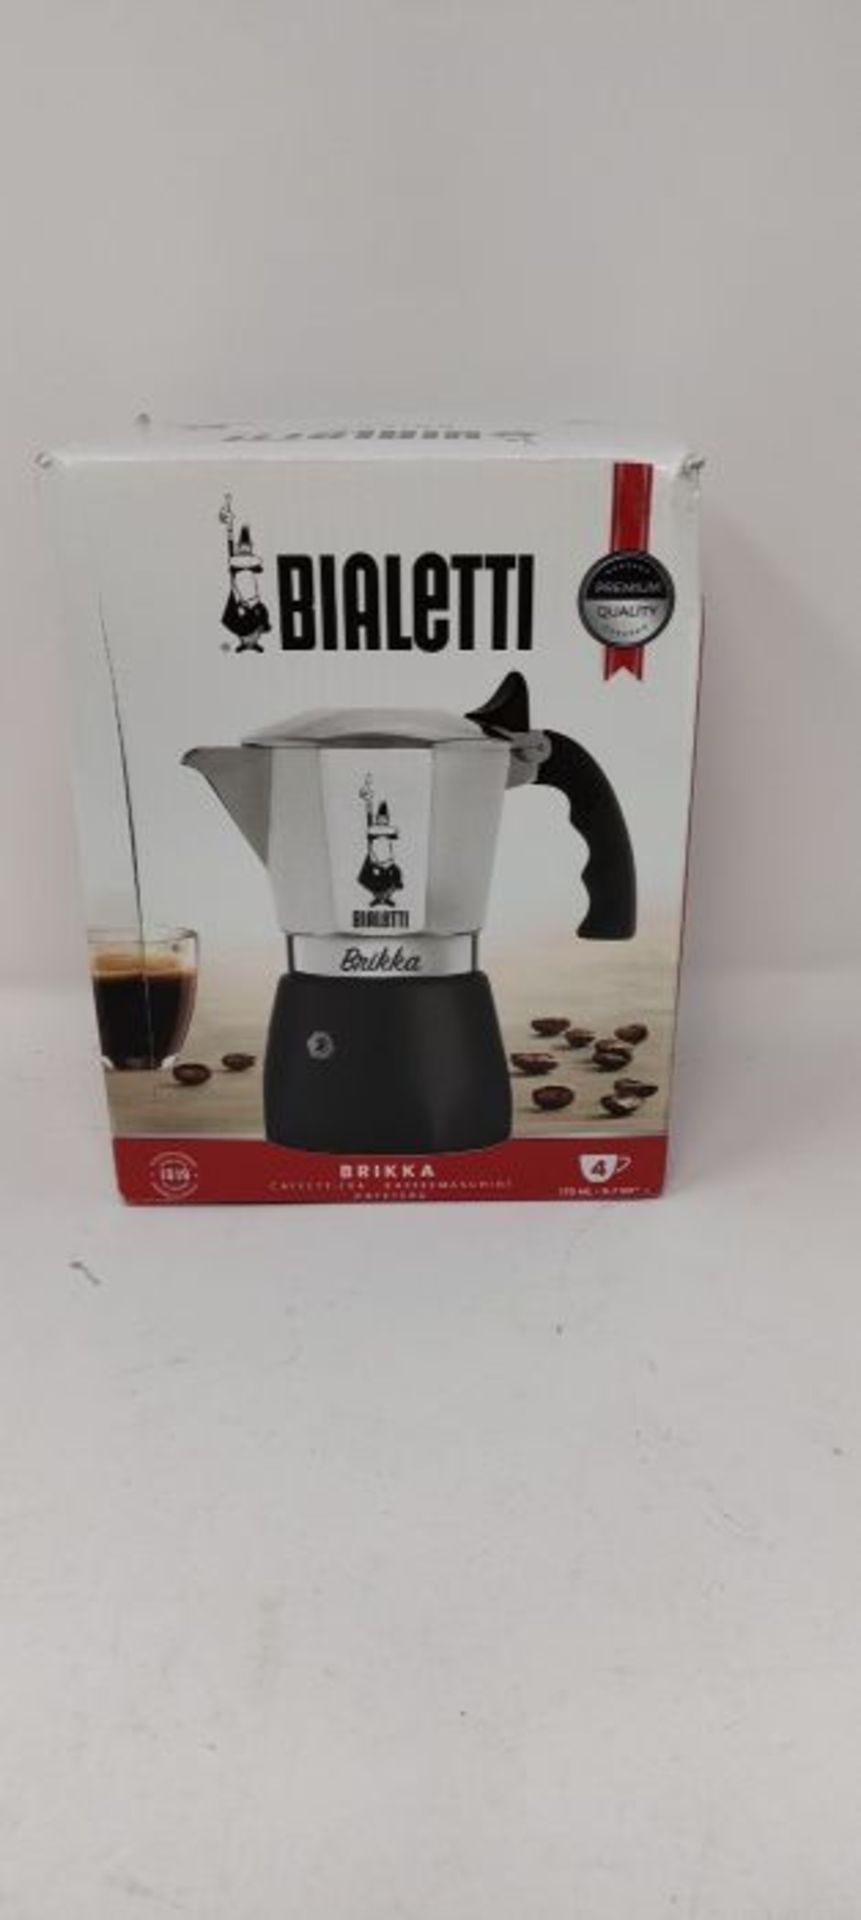 Bialetti New Brikka Aluminium Coffee Maker with Double Cream 4 Cups - Image 2 of 3